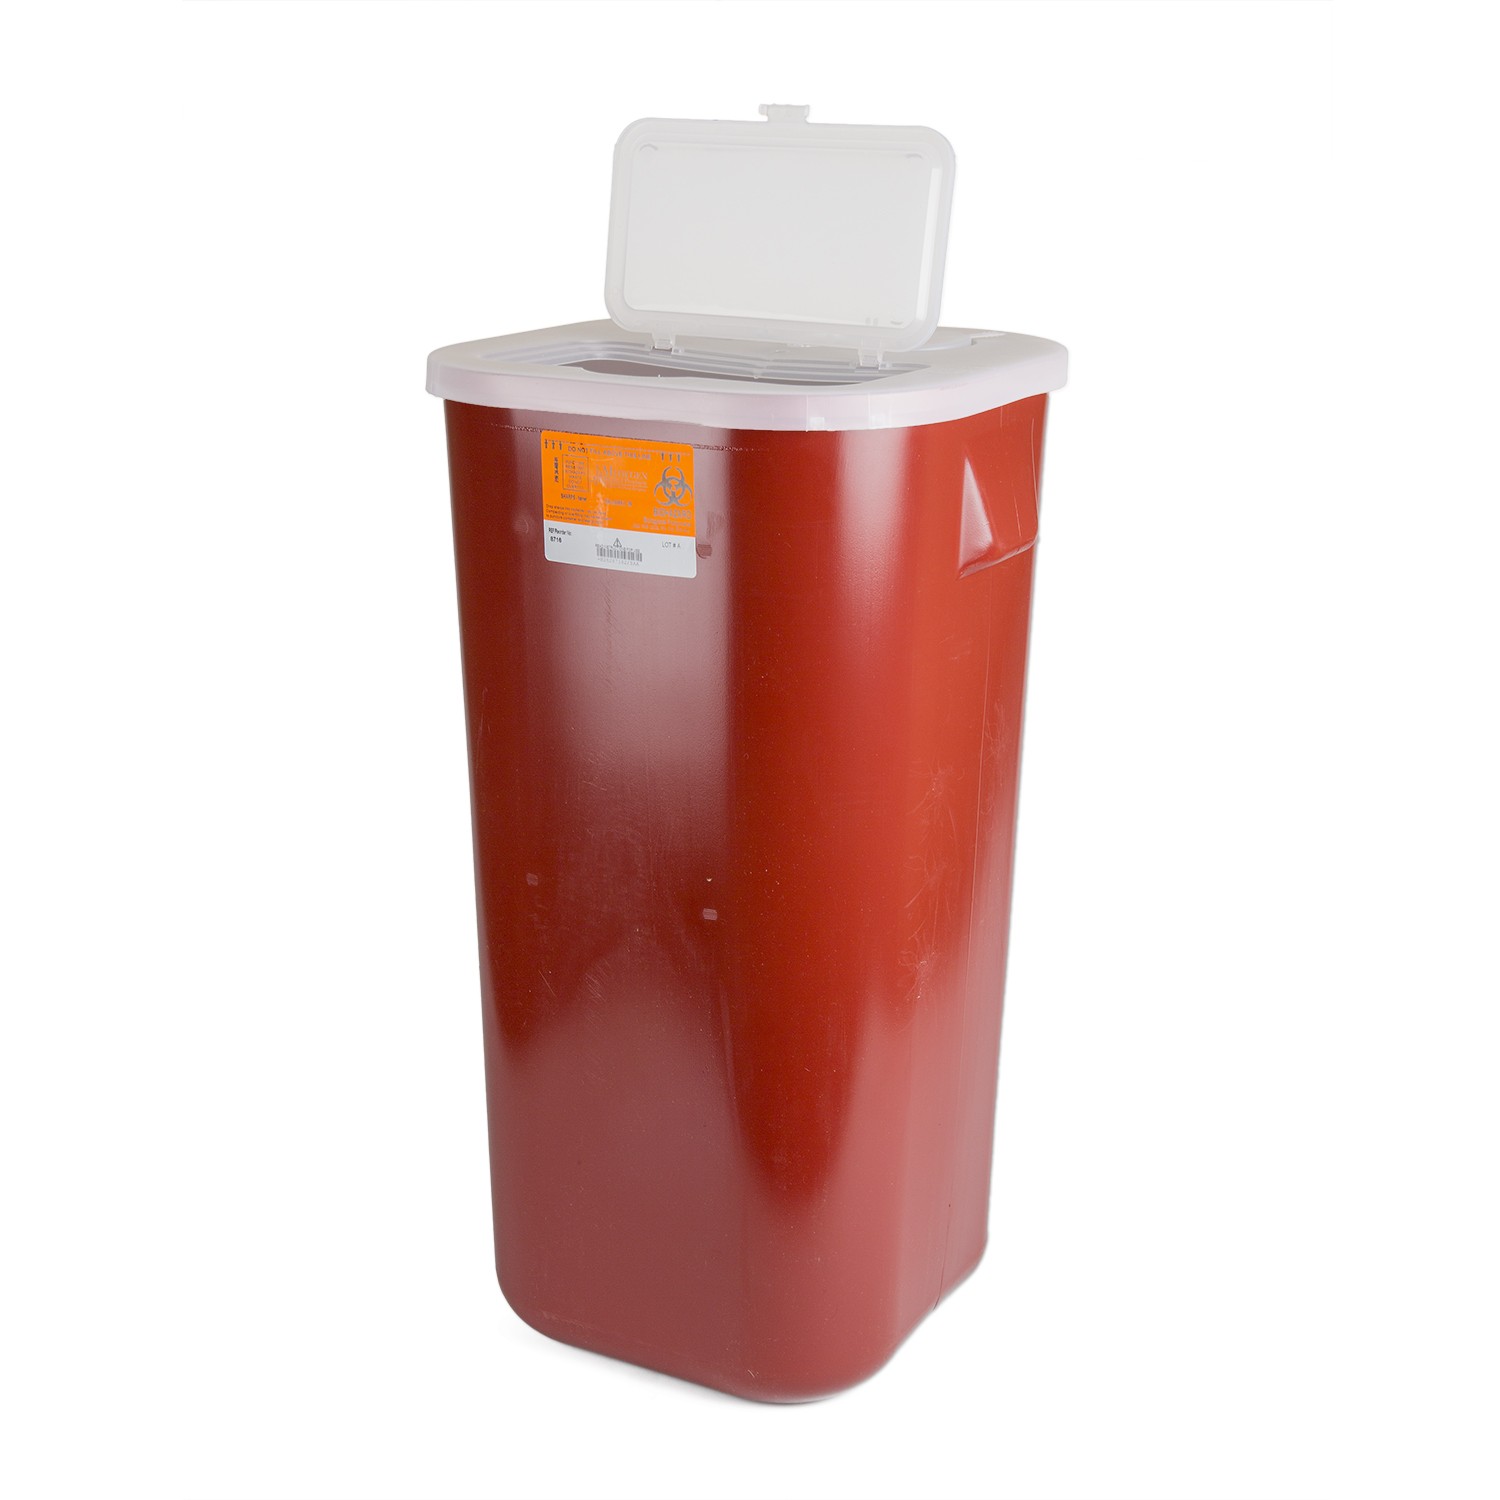 16 Gal Sharps Containers Products, Supplies and Equipment